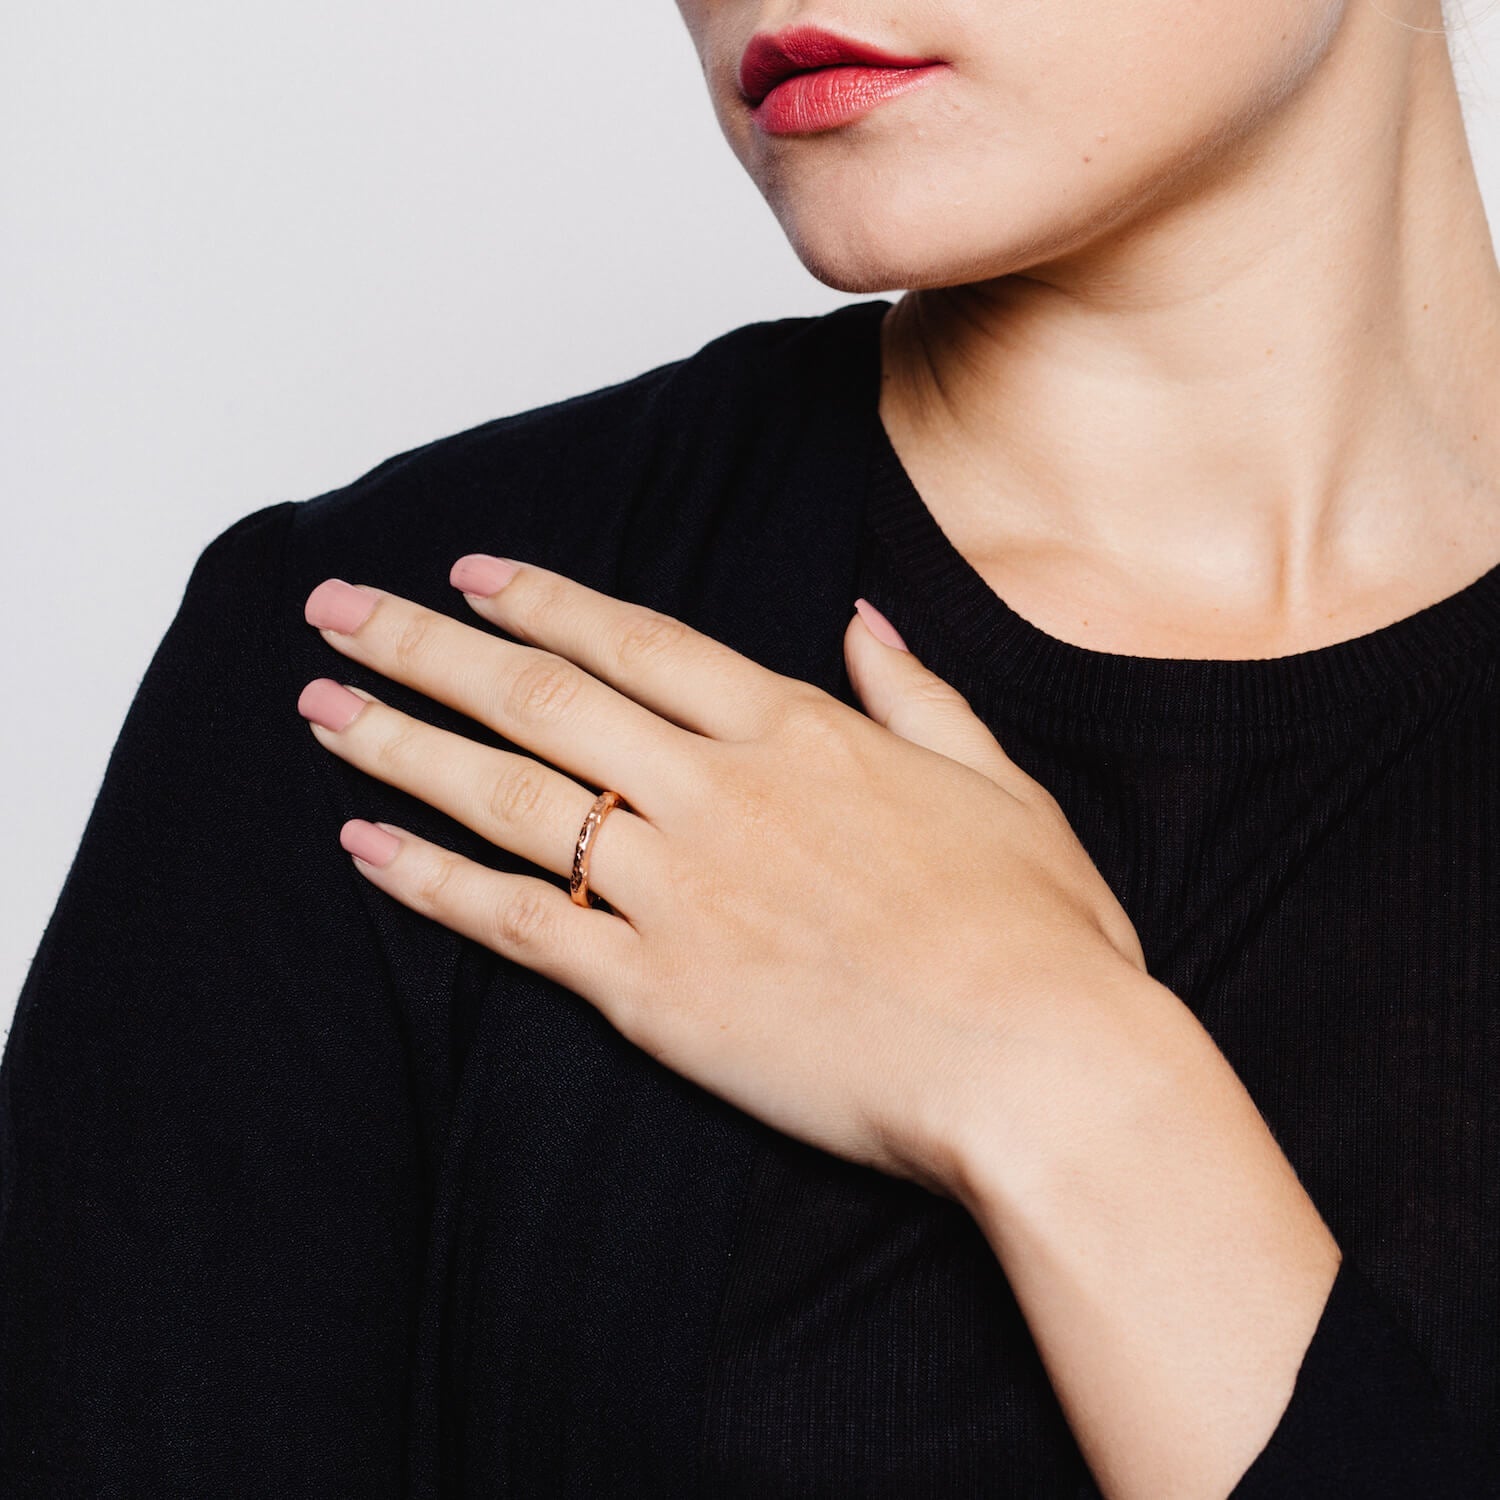 Model wearing gold ring with detailed texturing in meteorite style